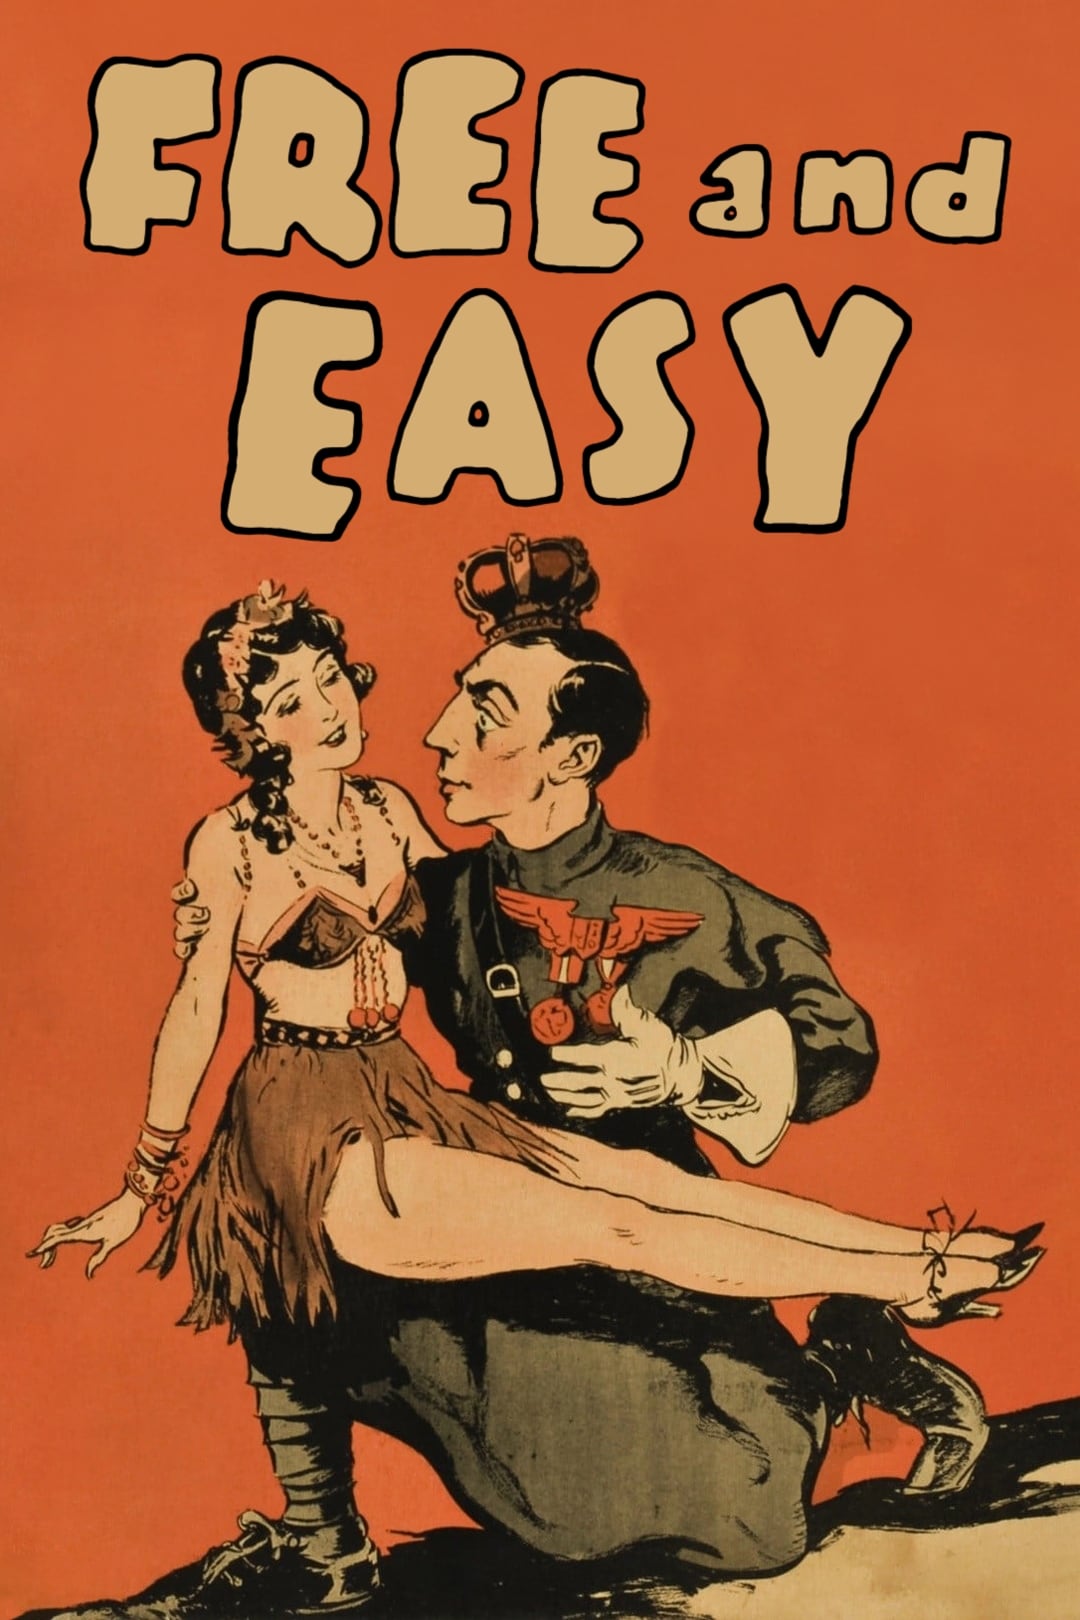 Free and Easy (1930)